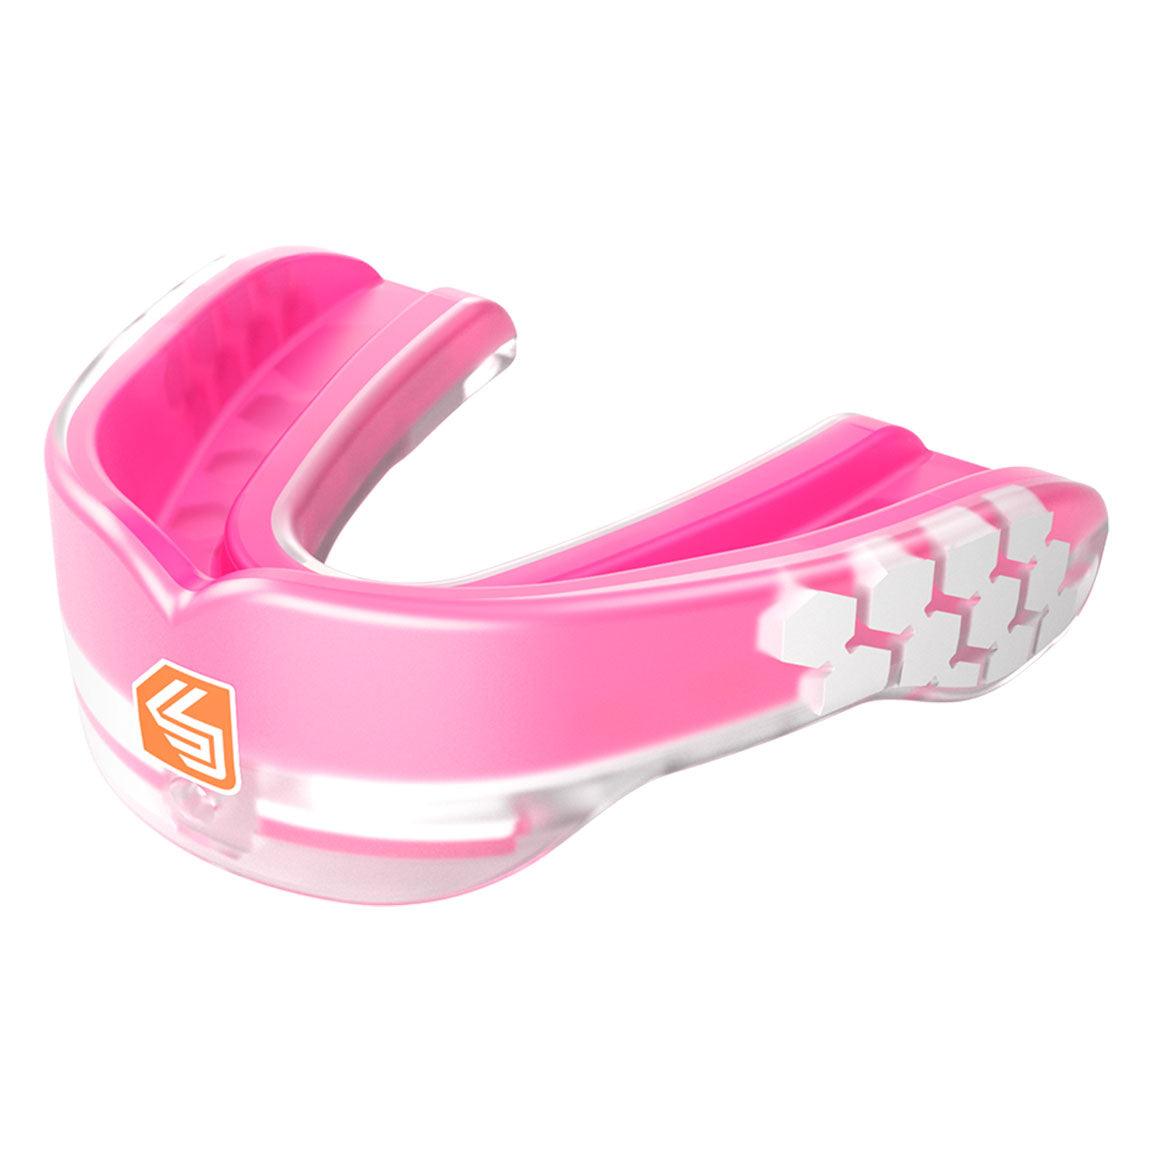 Gel Max Power Flavor Fusion Mouthguard - Sports Excellence